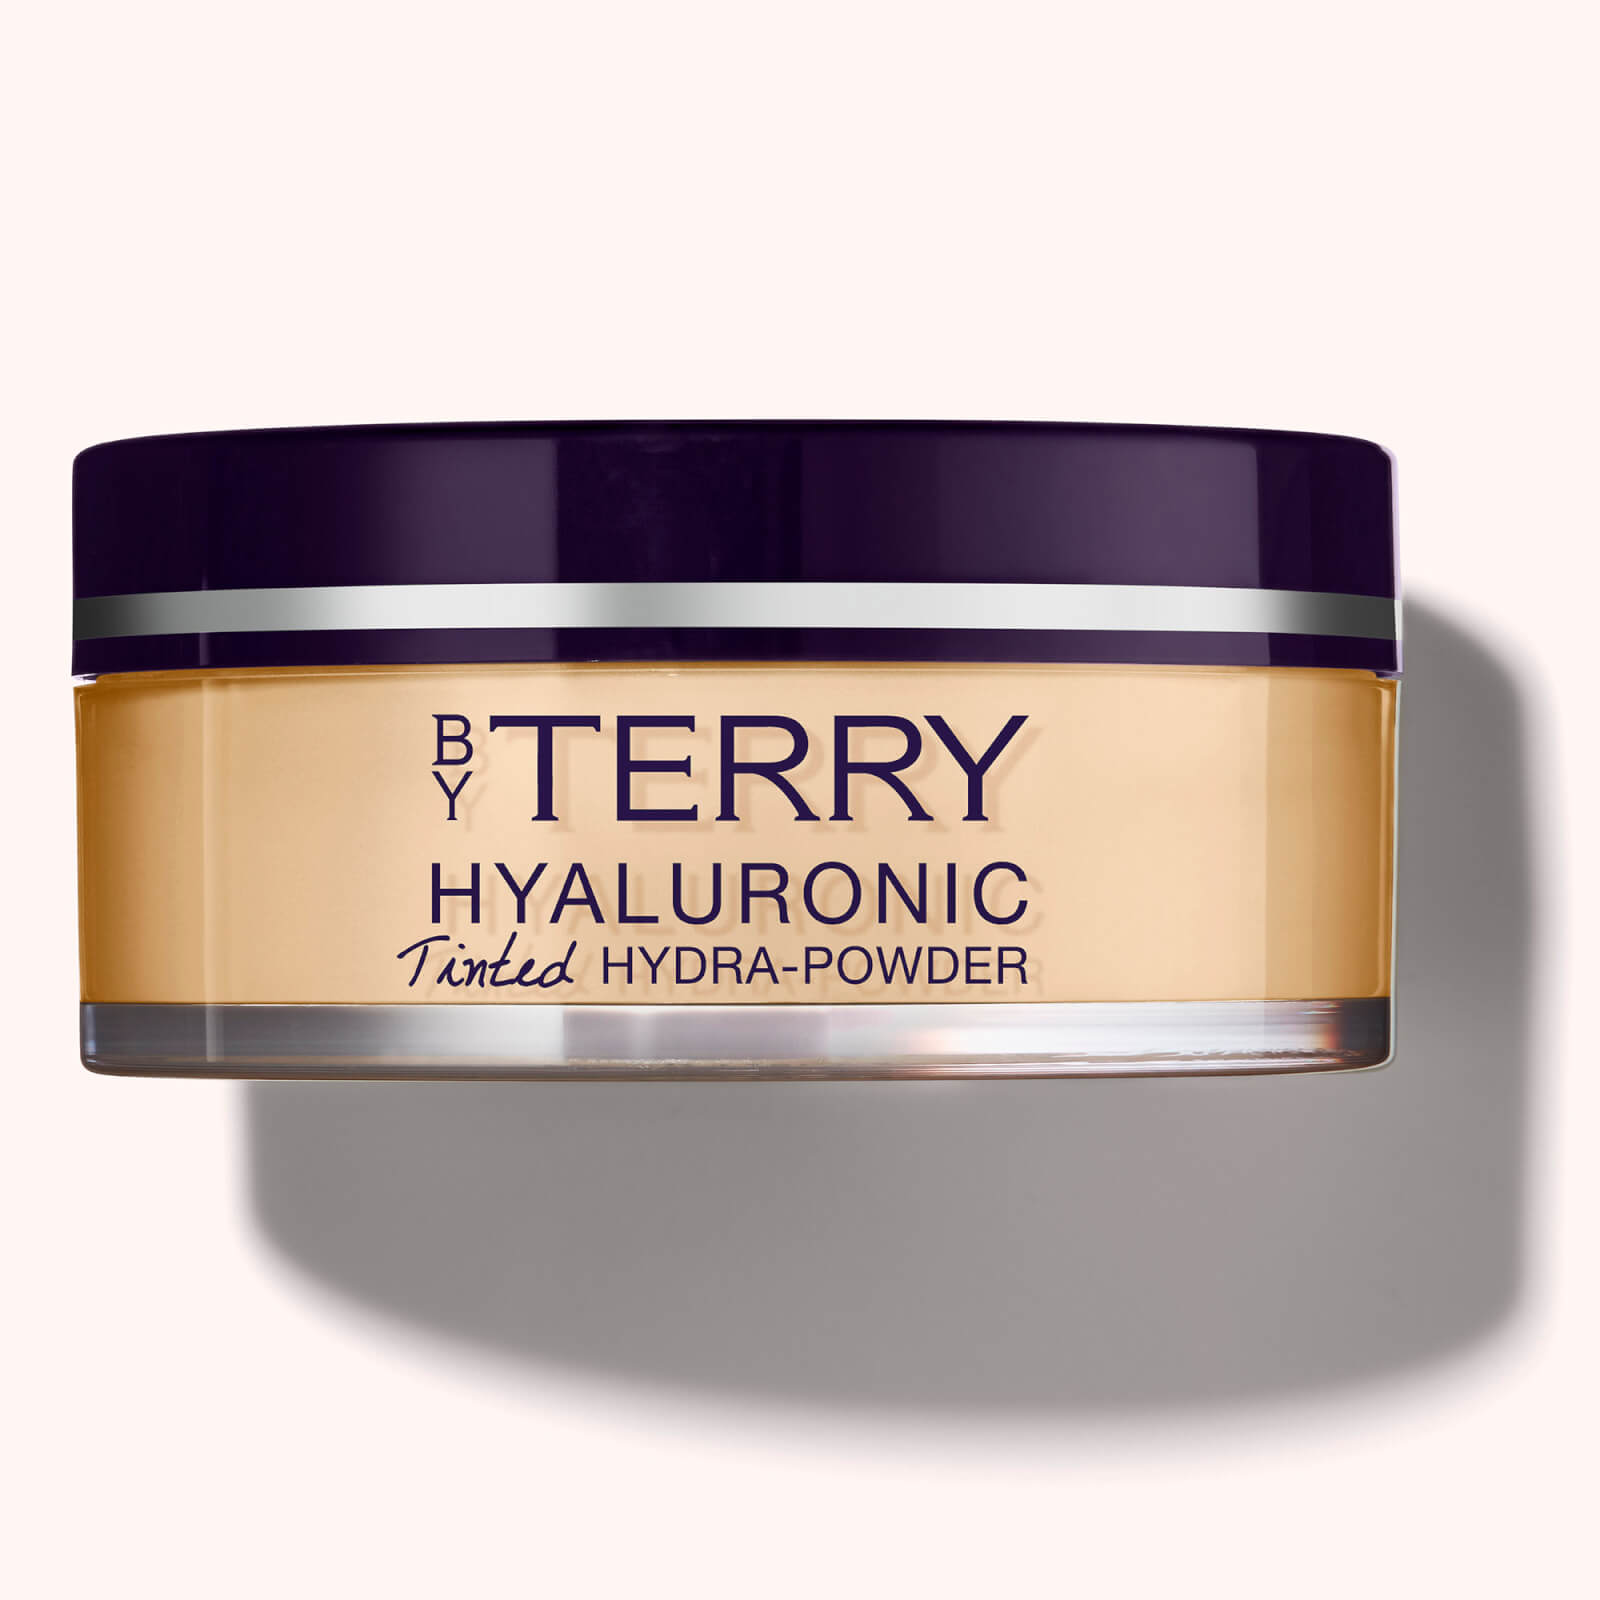 By Terry Hyaluronic Tinted Hydra-powder (10 G.) In N100. Fair